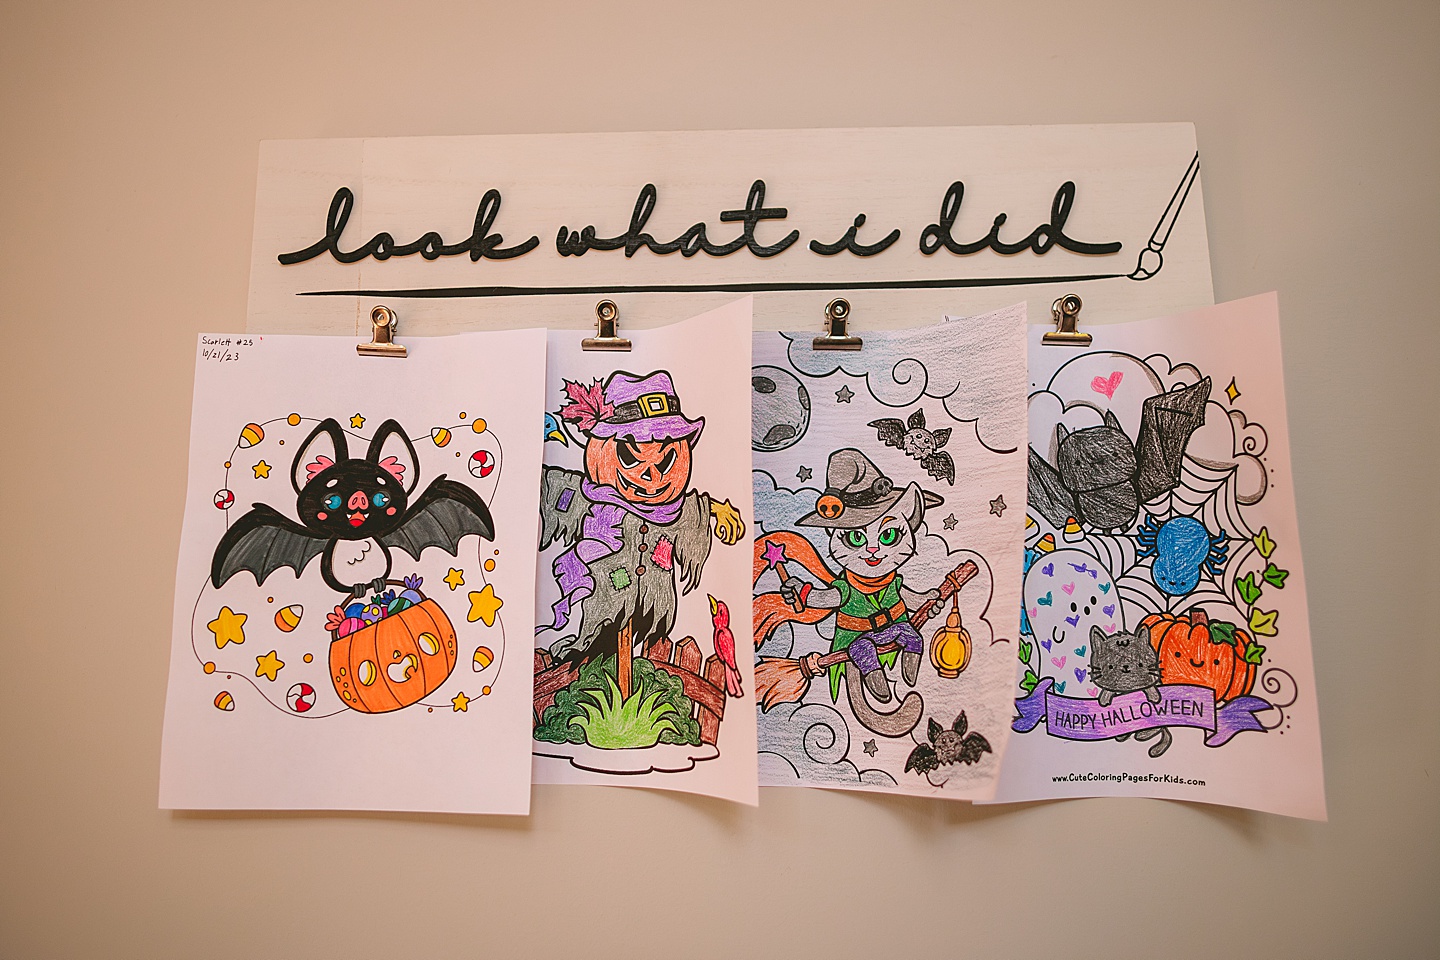 A collection of colored Halloween artwork hangs on a wall